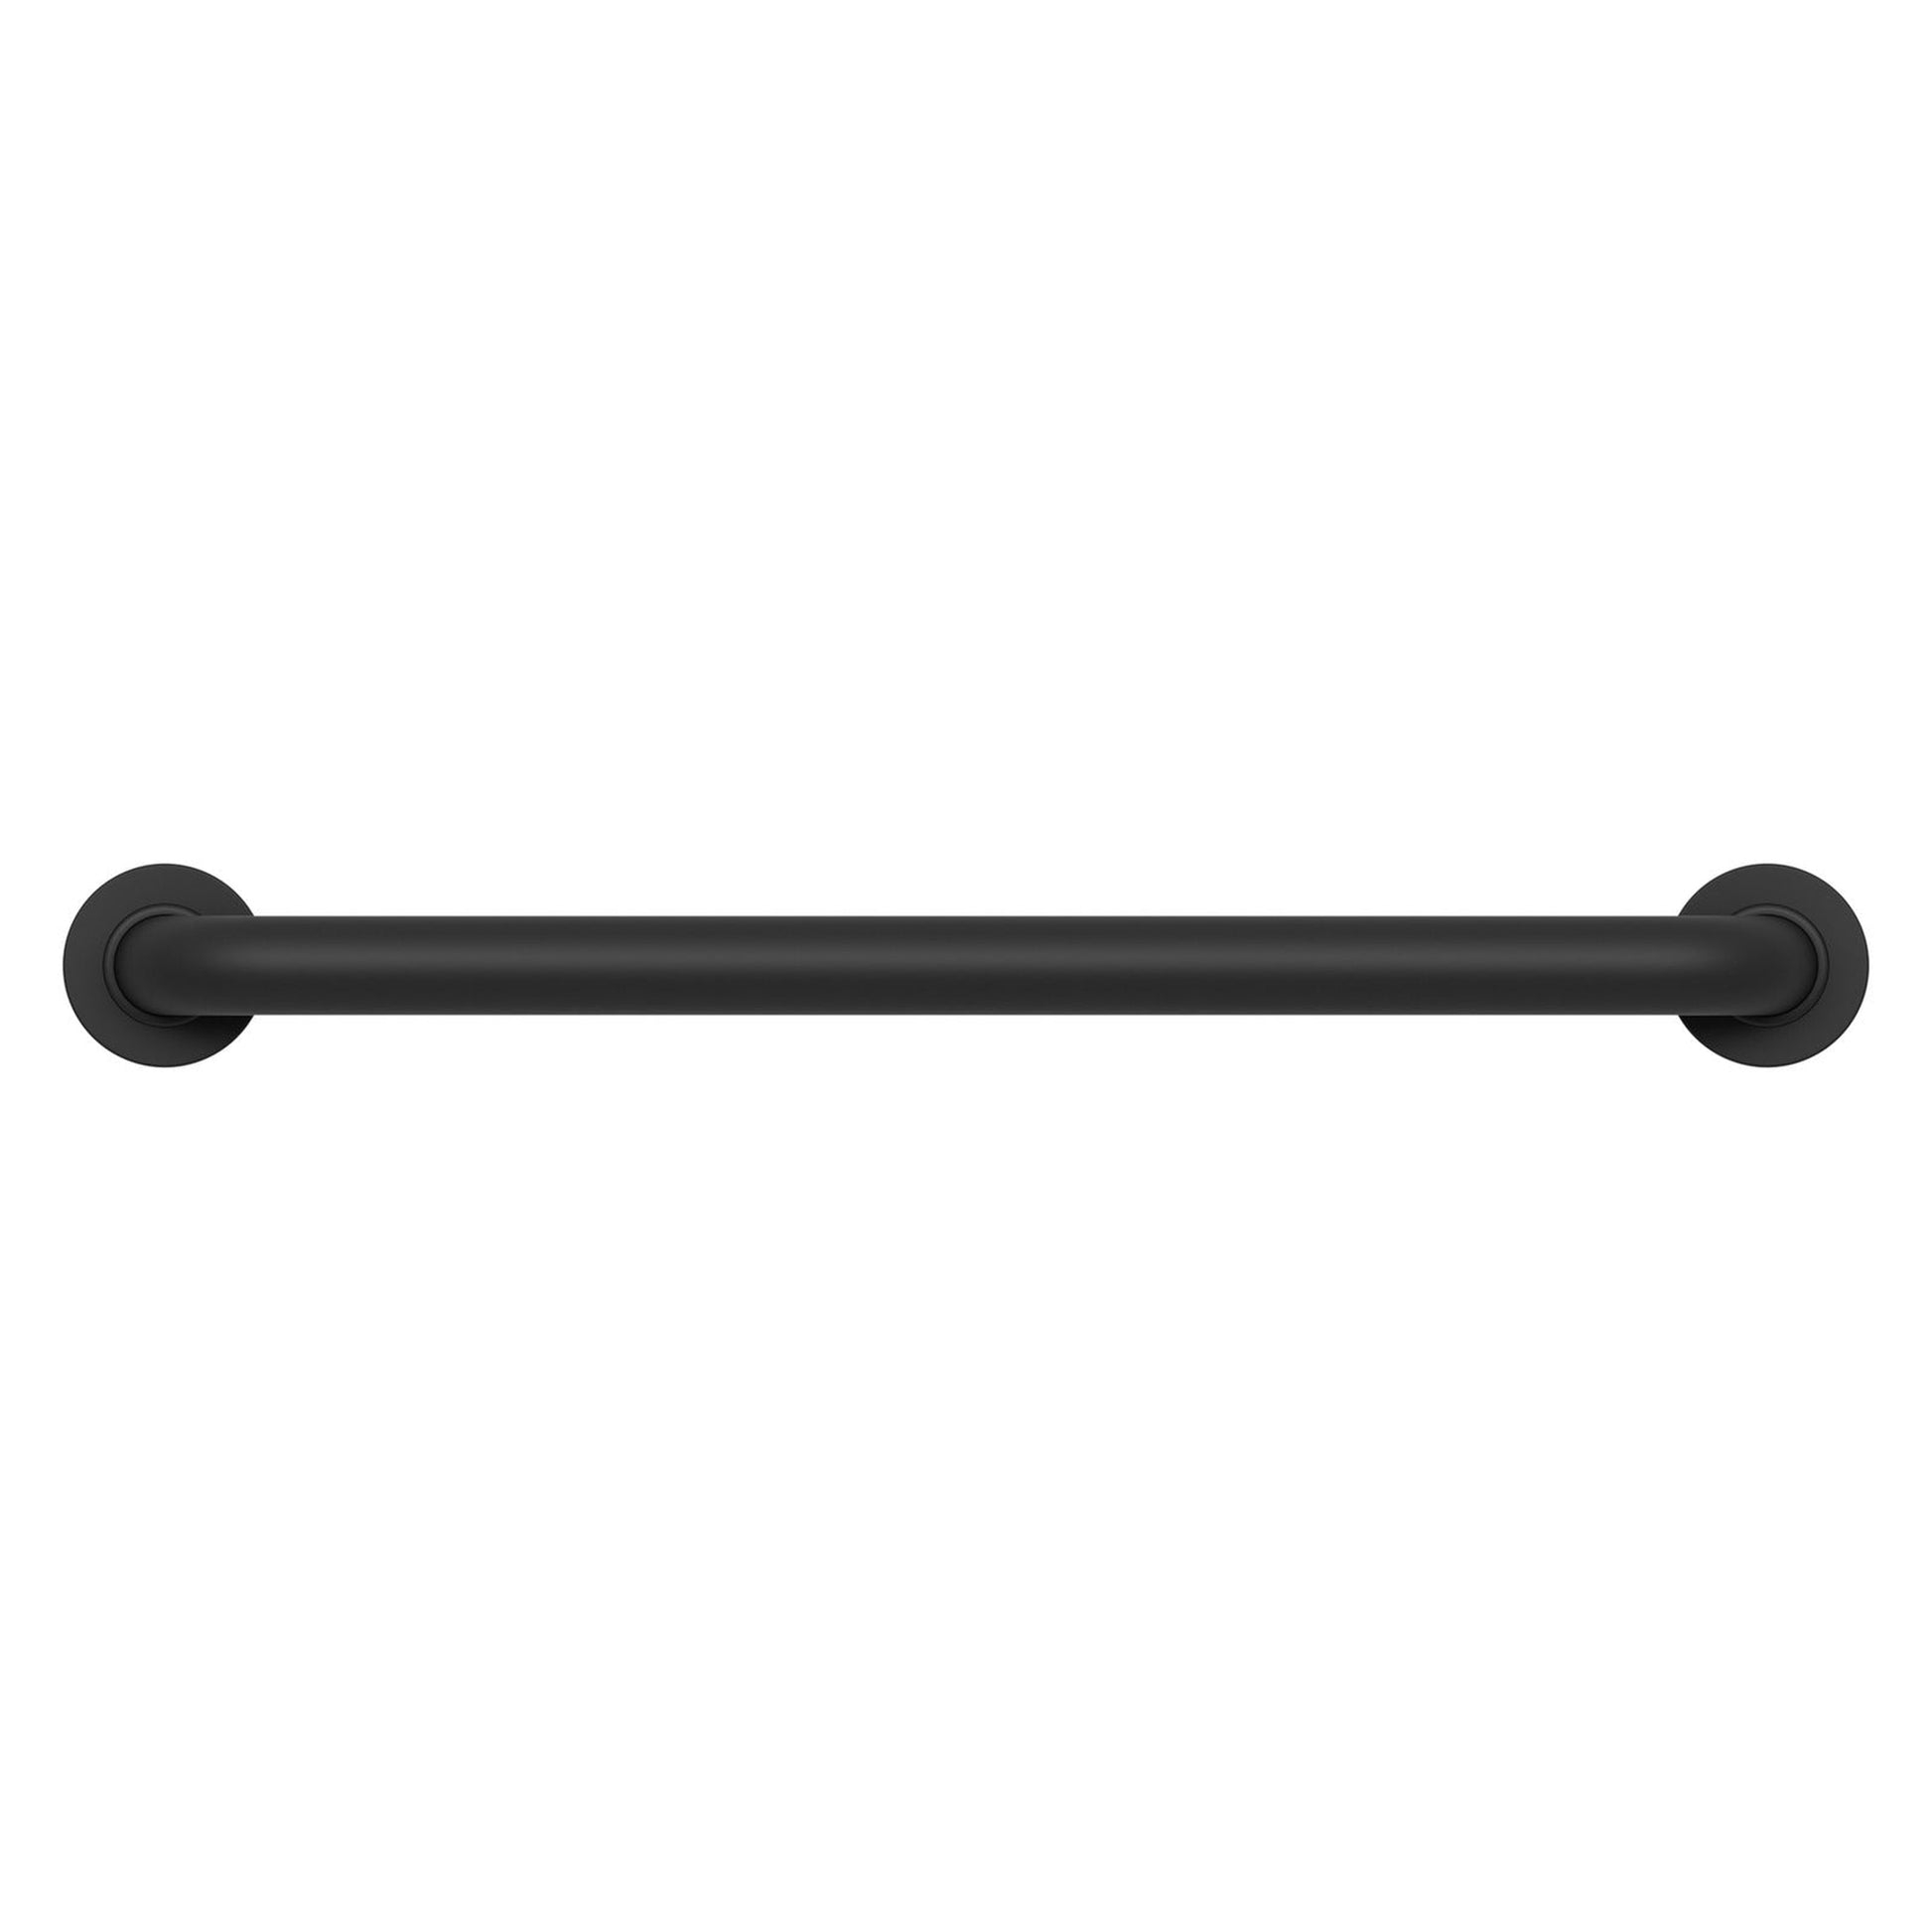 Evekare 24" x 1.5" Stainless Steel Concealed Mount Grab Bar With Comfort Grip Coating in Matte Black